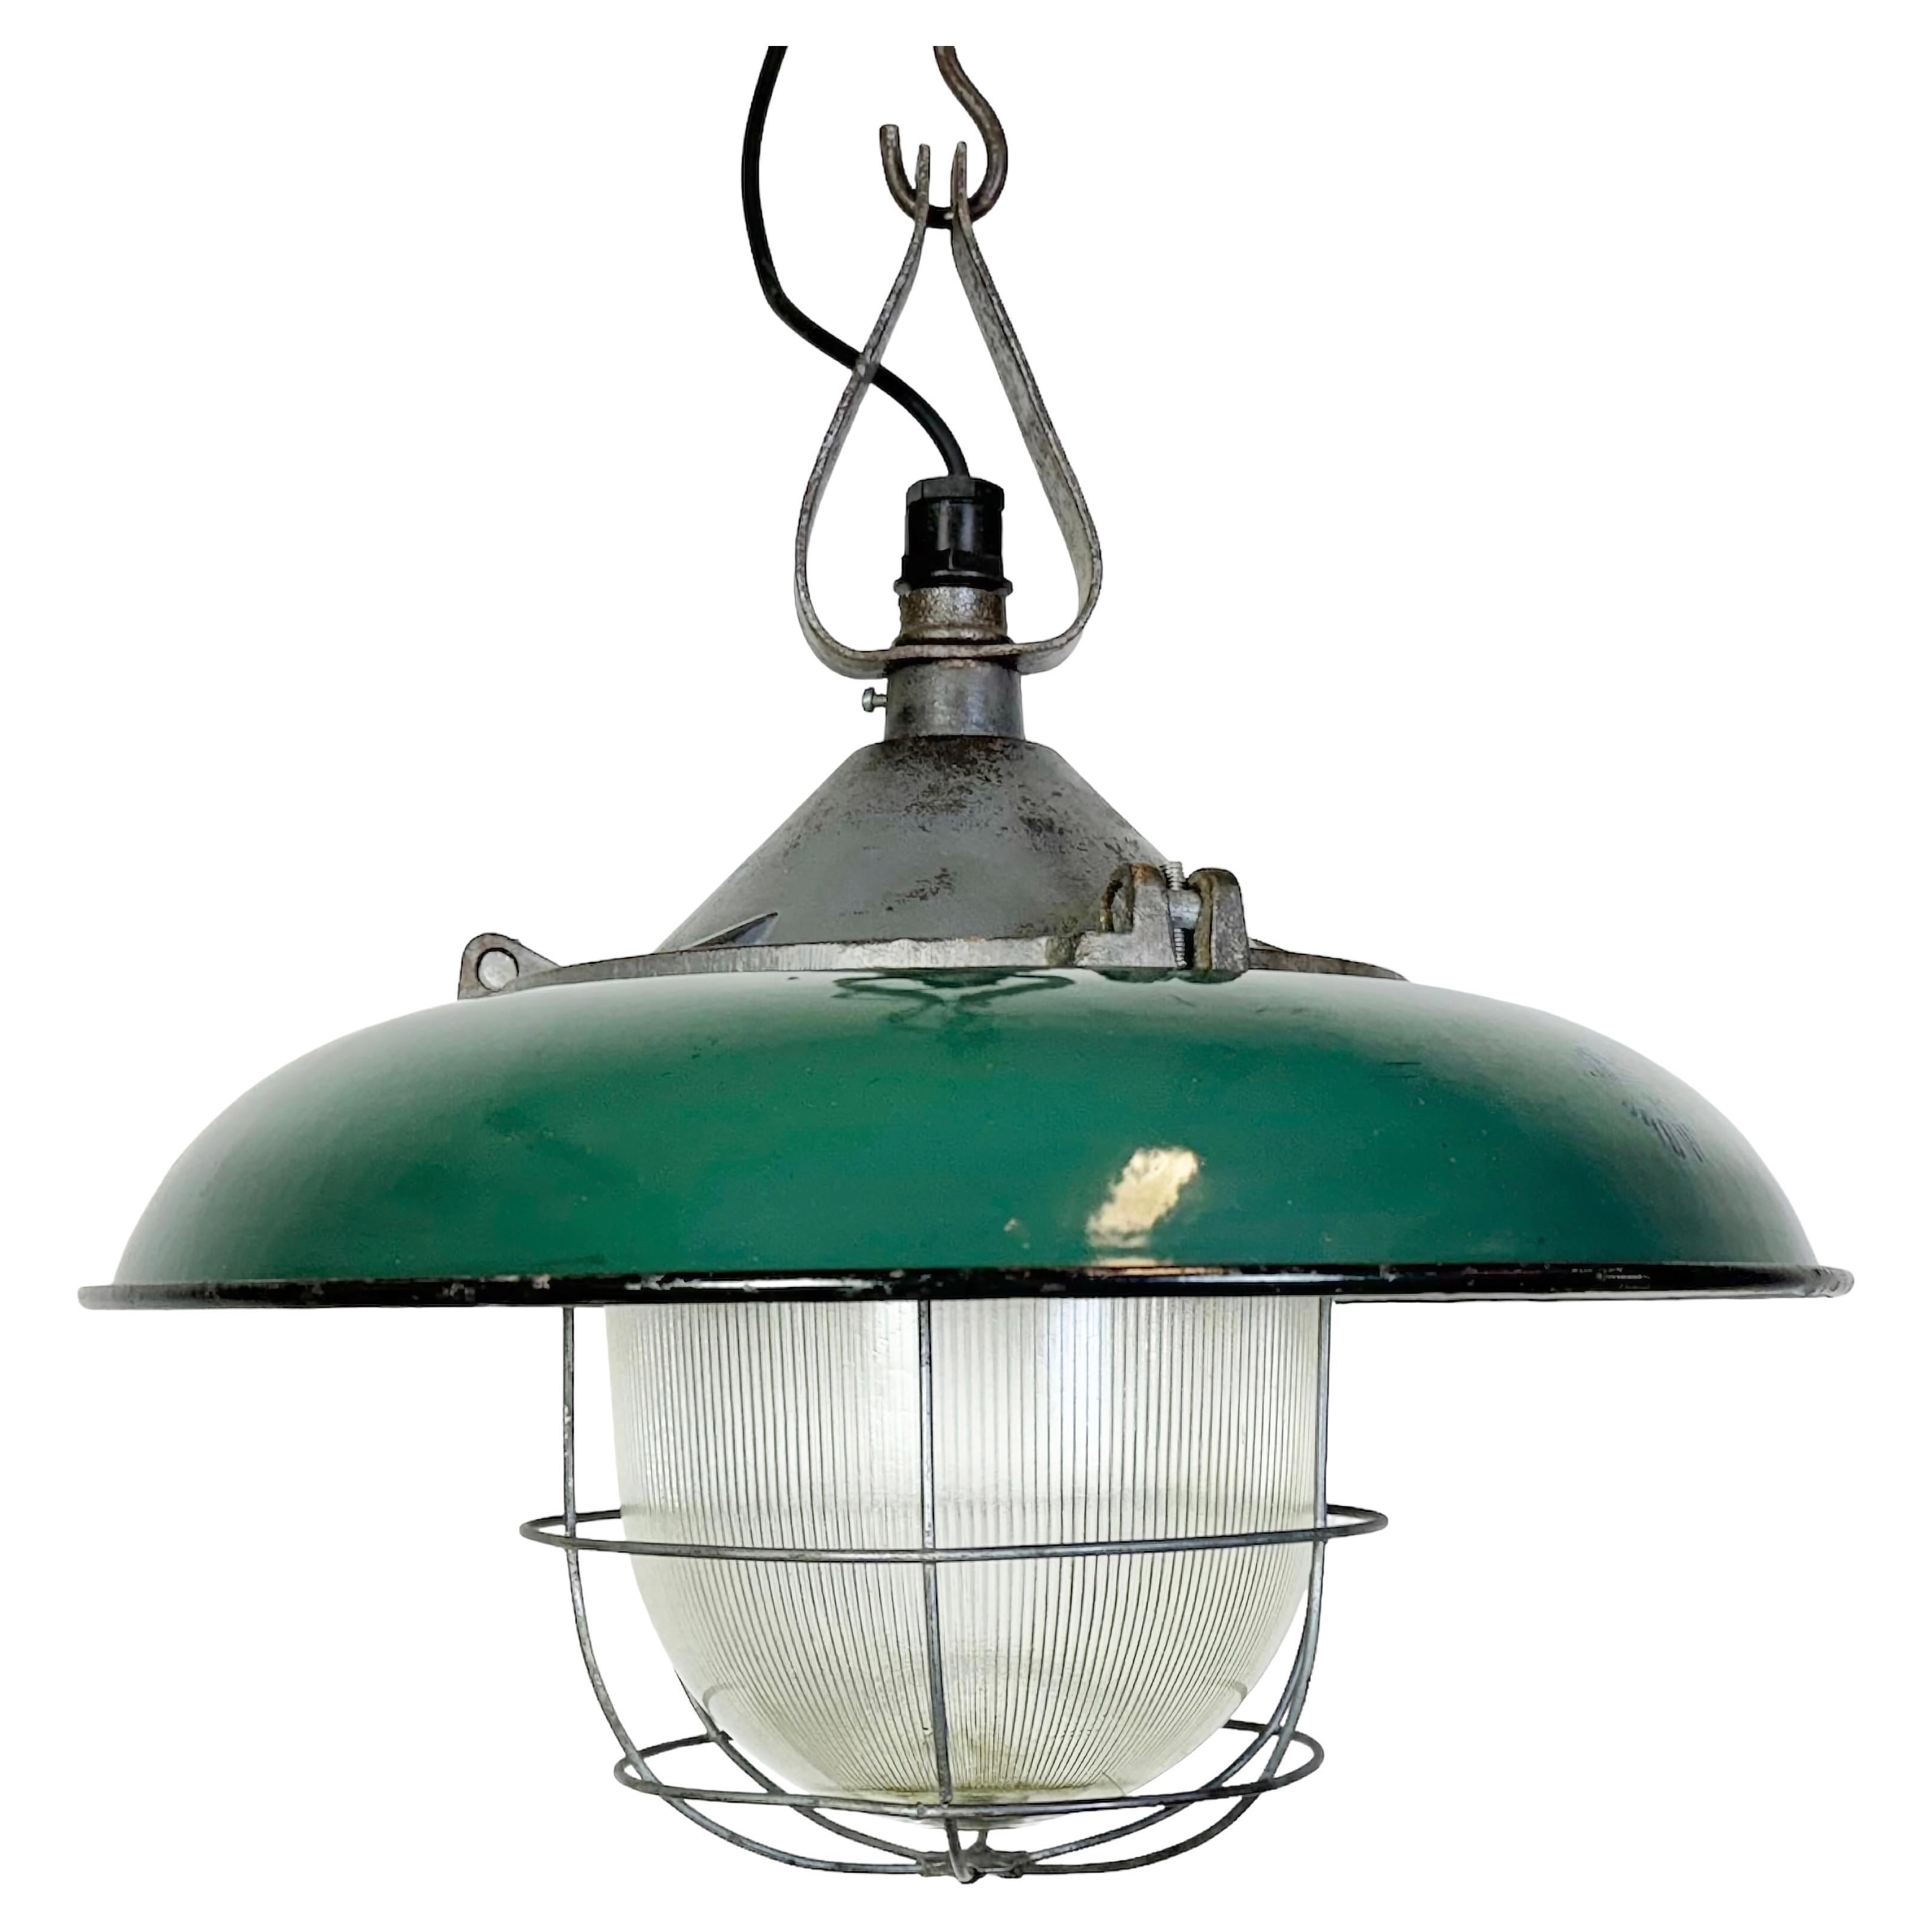 Industrial Green Enamel Factory Cage Pendant Lamp in Cast Iron, 1960s